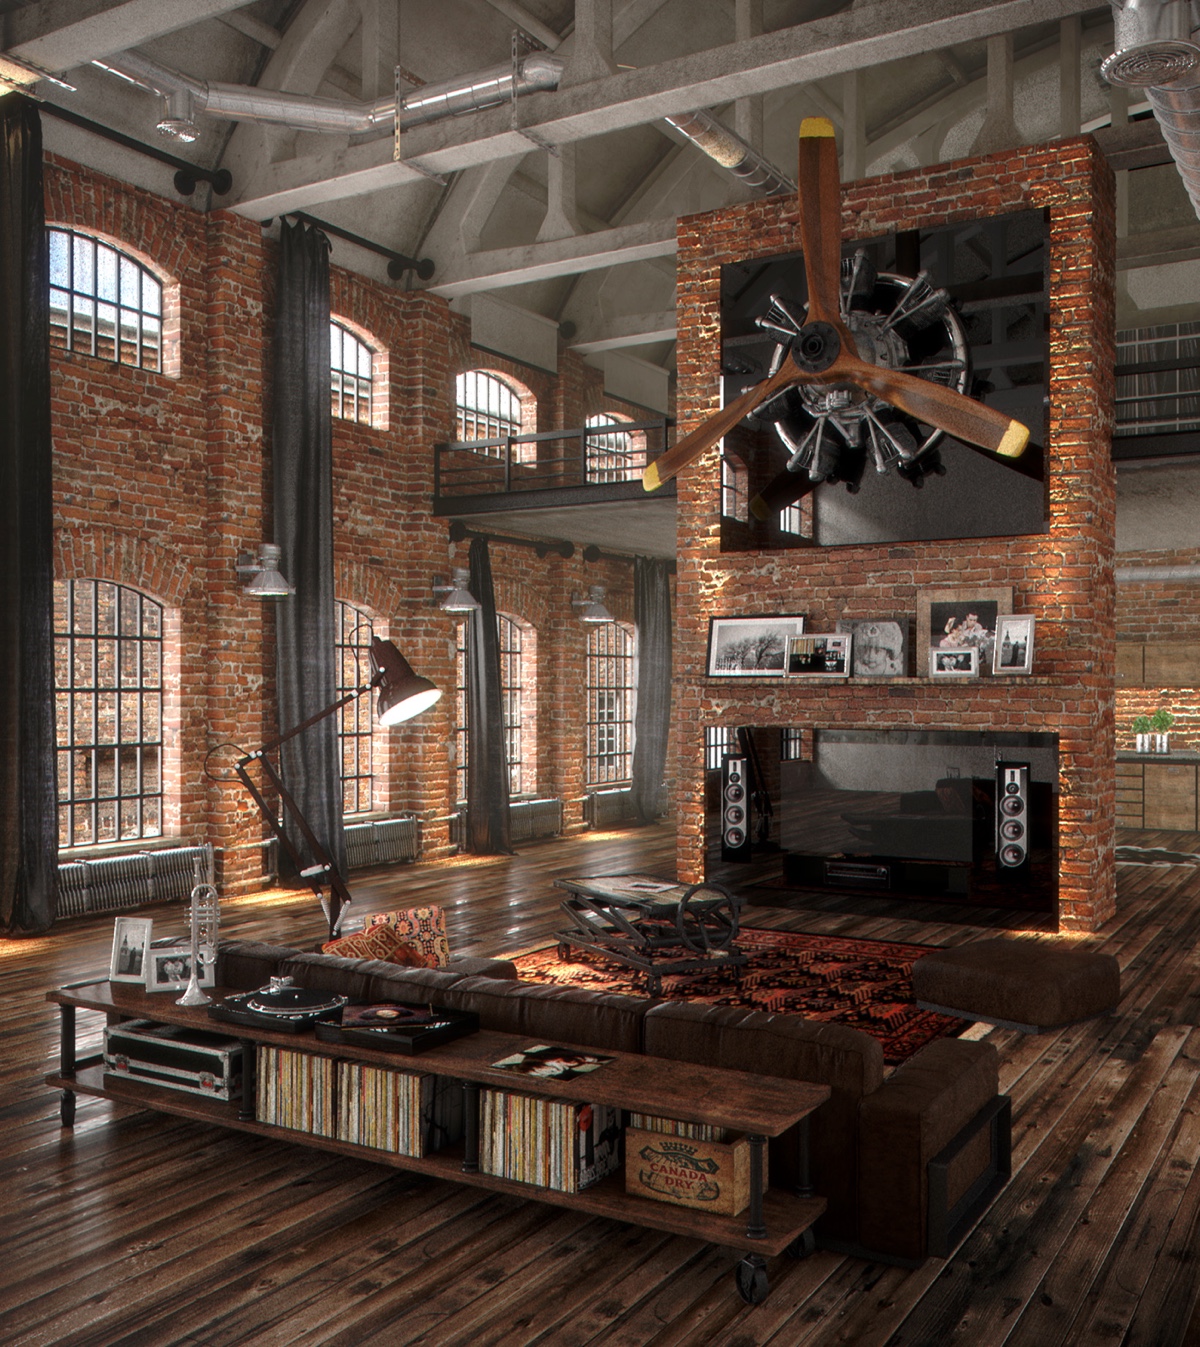 The Edgy Elegance: Industrial Design Meets Luxury Living